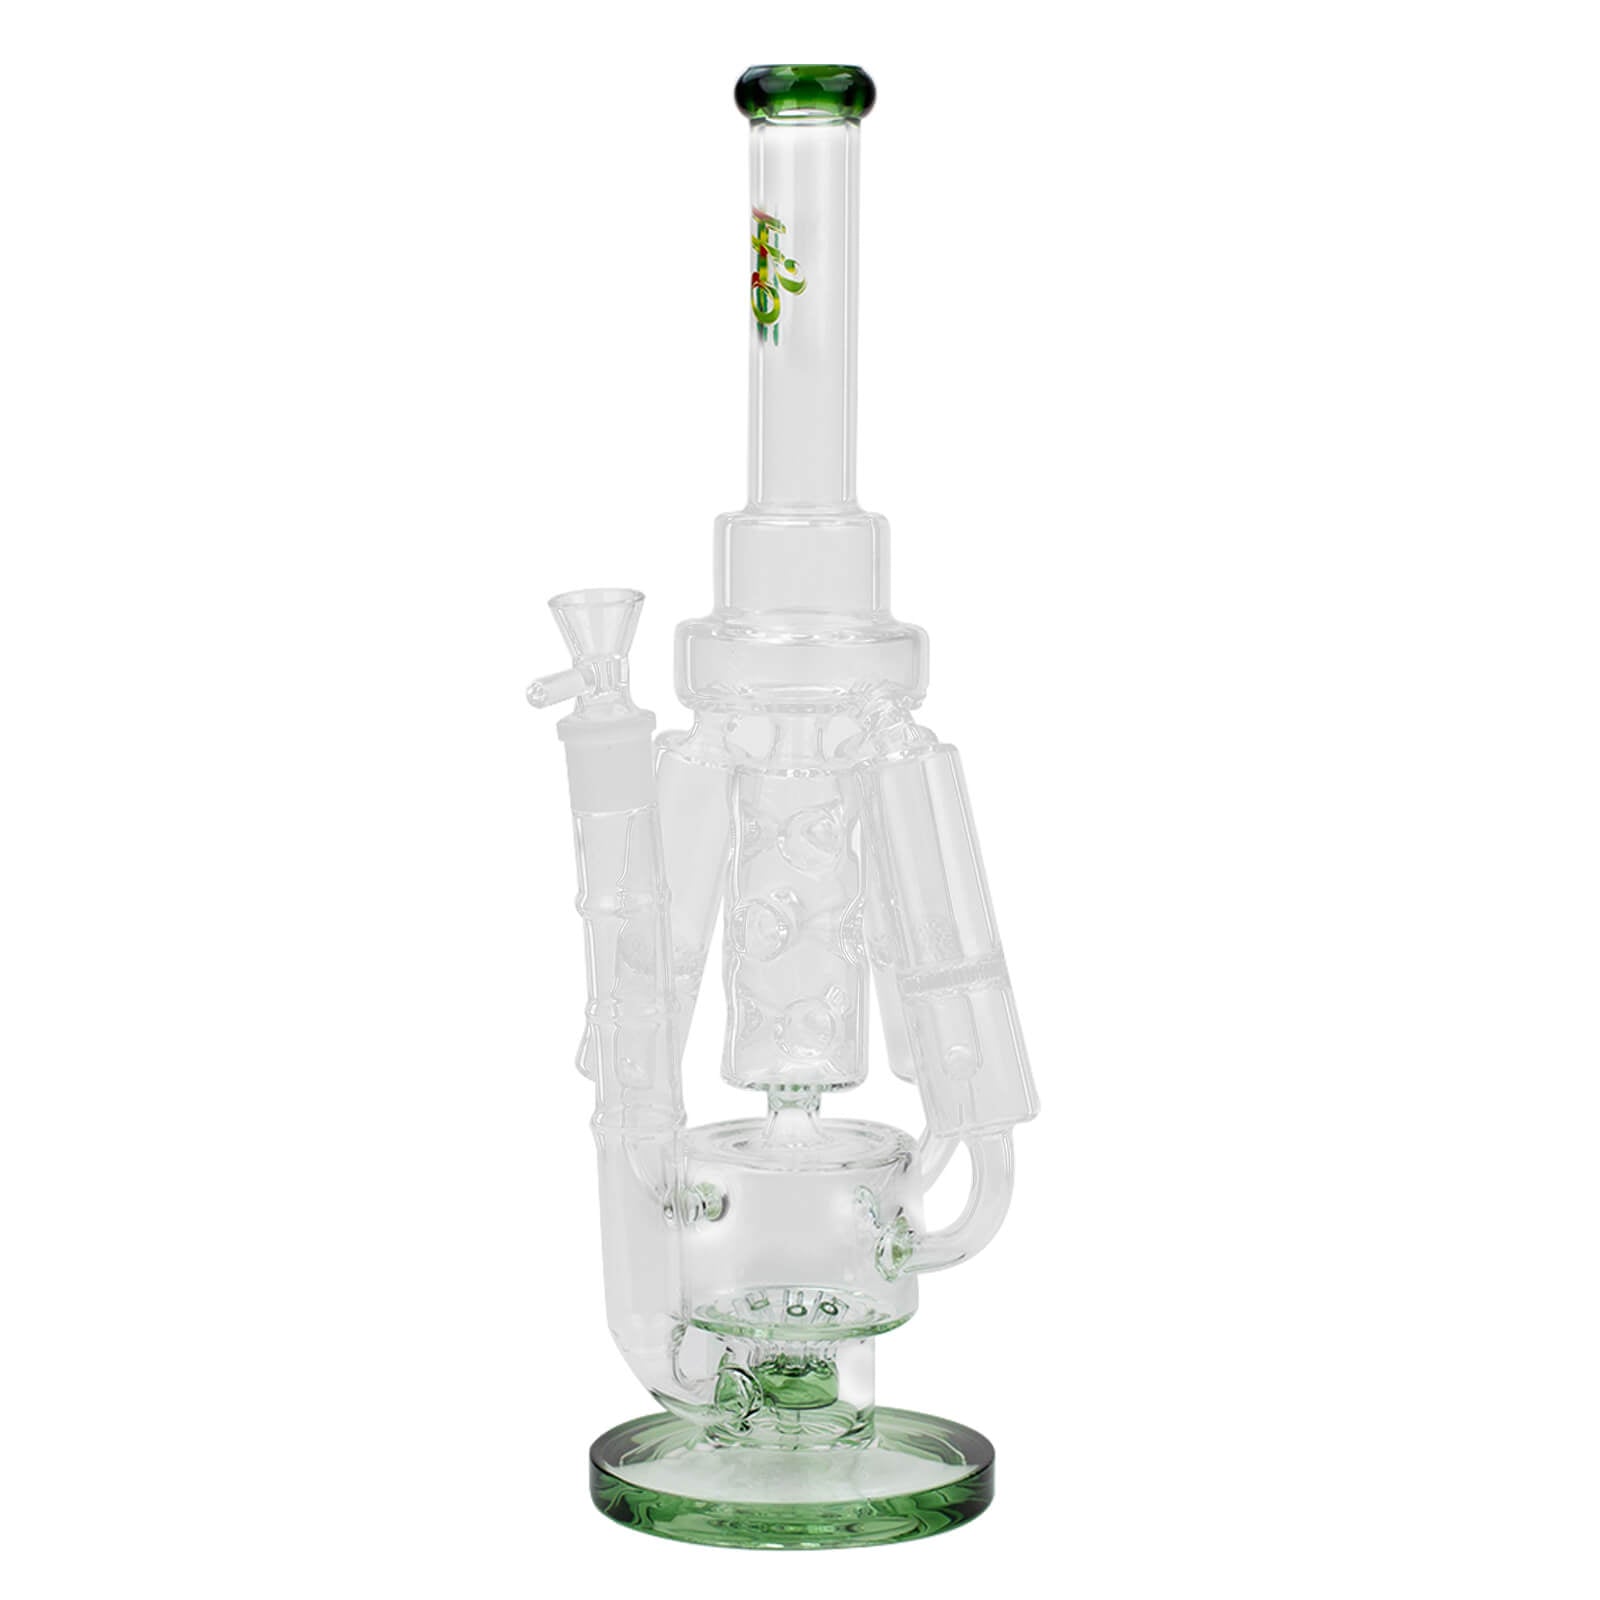 17" H2O Three Honeycomb Silnders Glass Water Recycle Bong